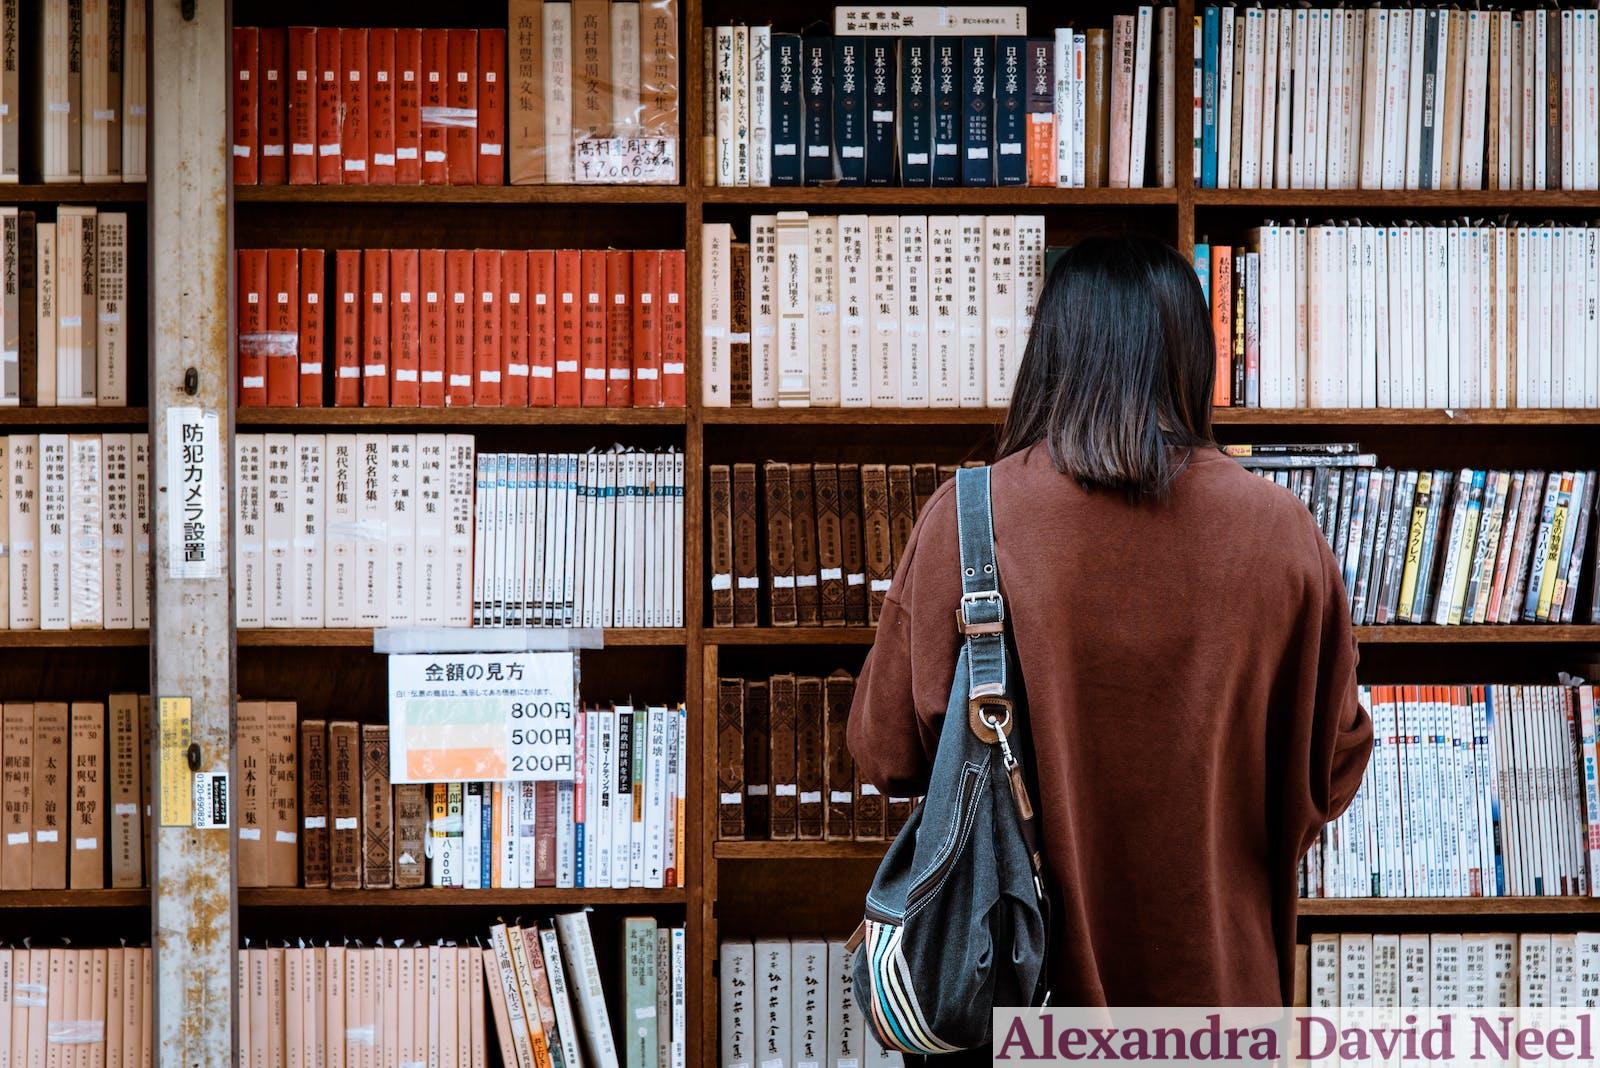 Woman Wearing Brown Shirt Carrying Black Leather Bag on Front of Library Books